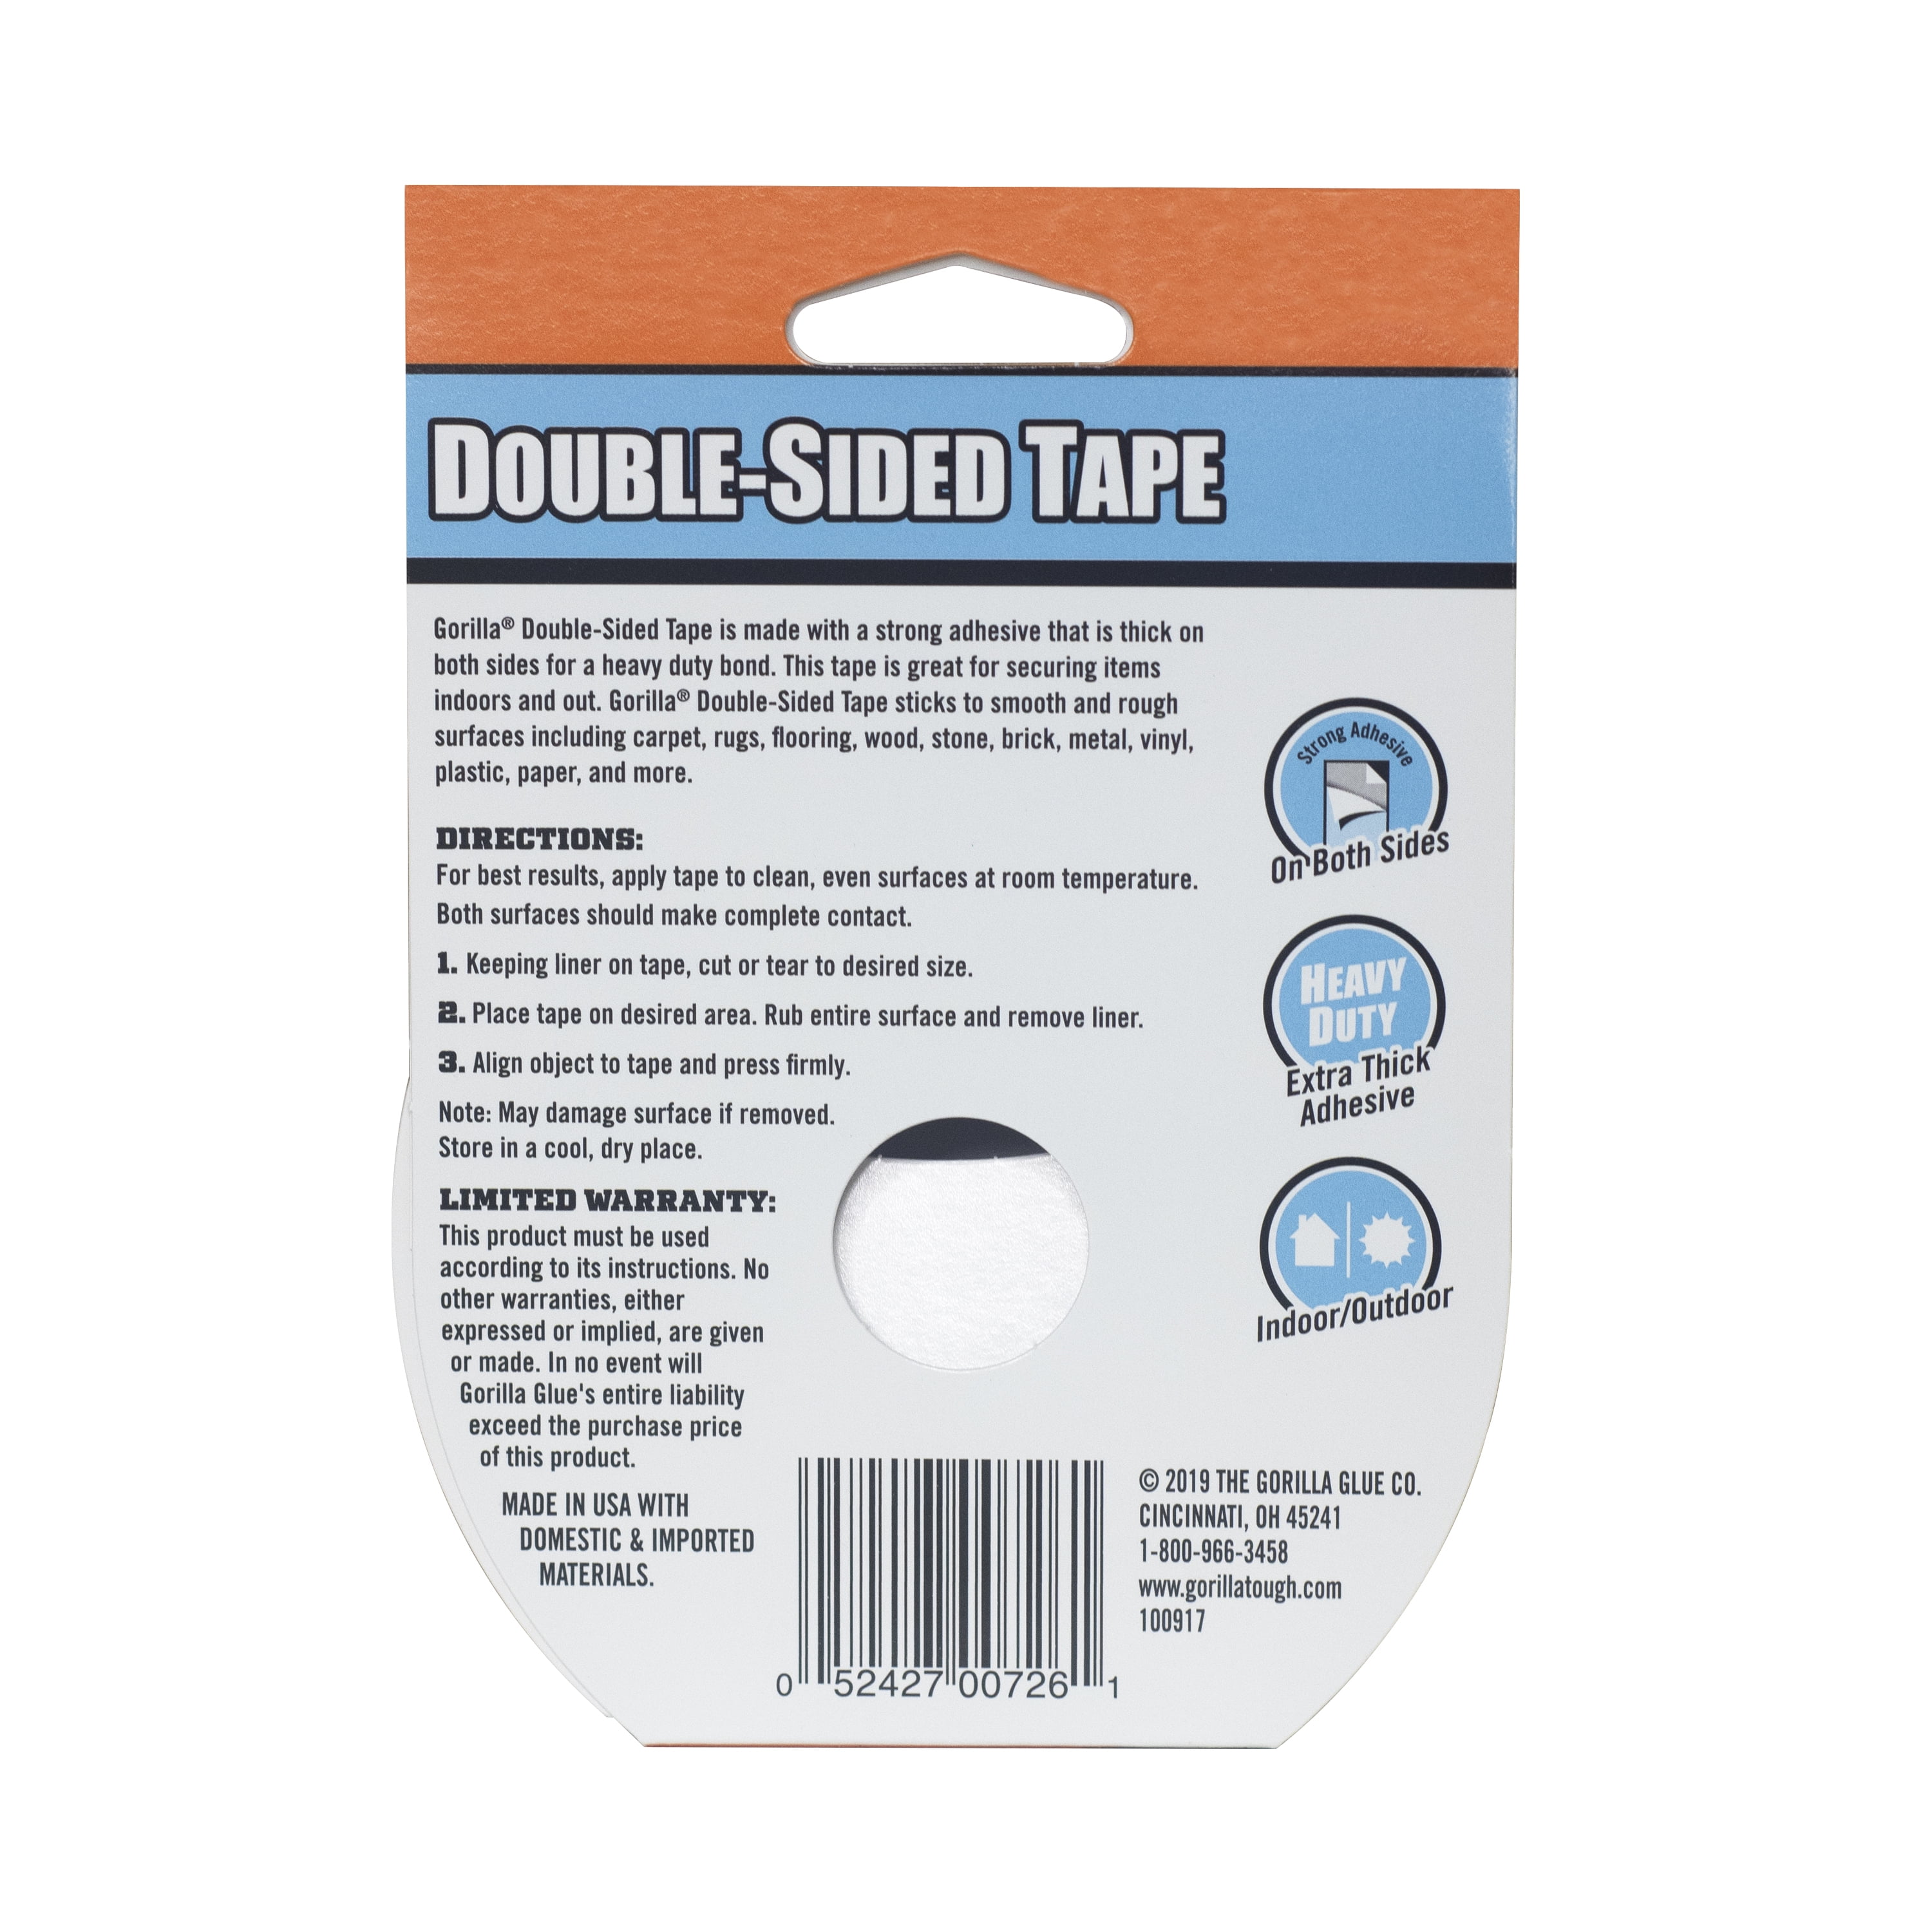 The Gorilla Glue Company Double-Sided Tape